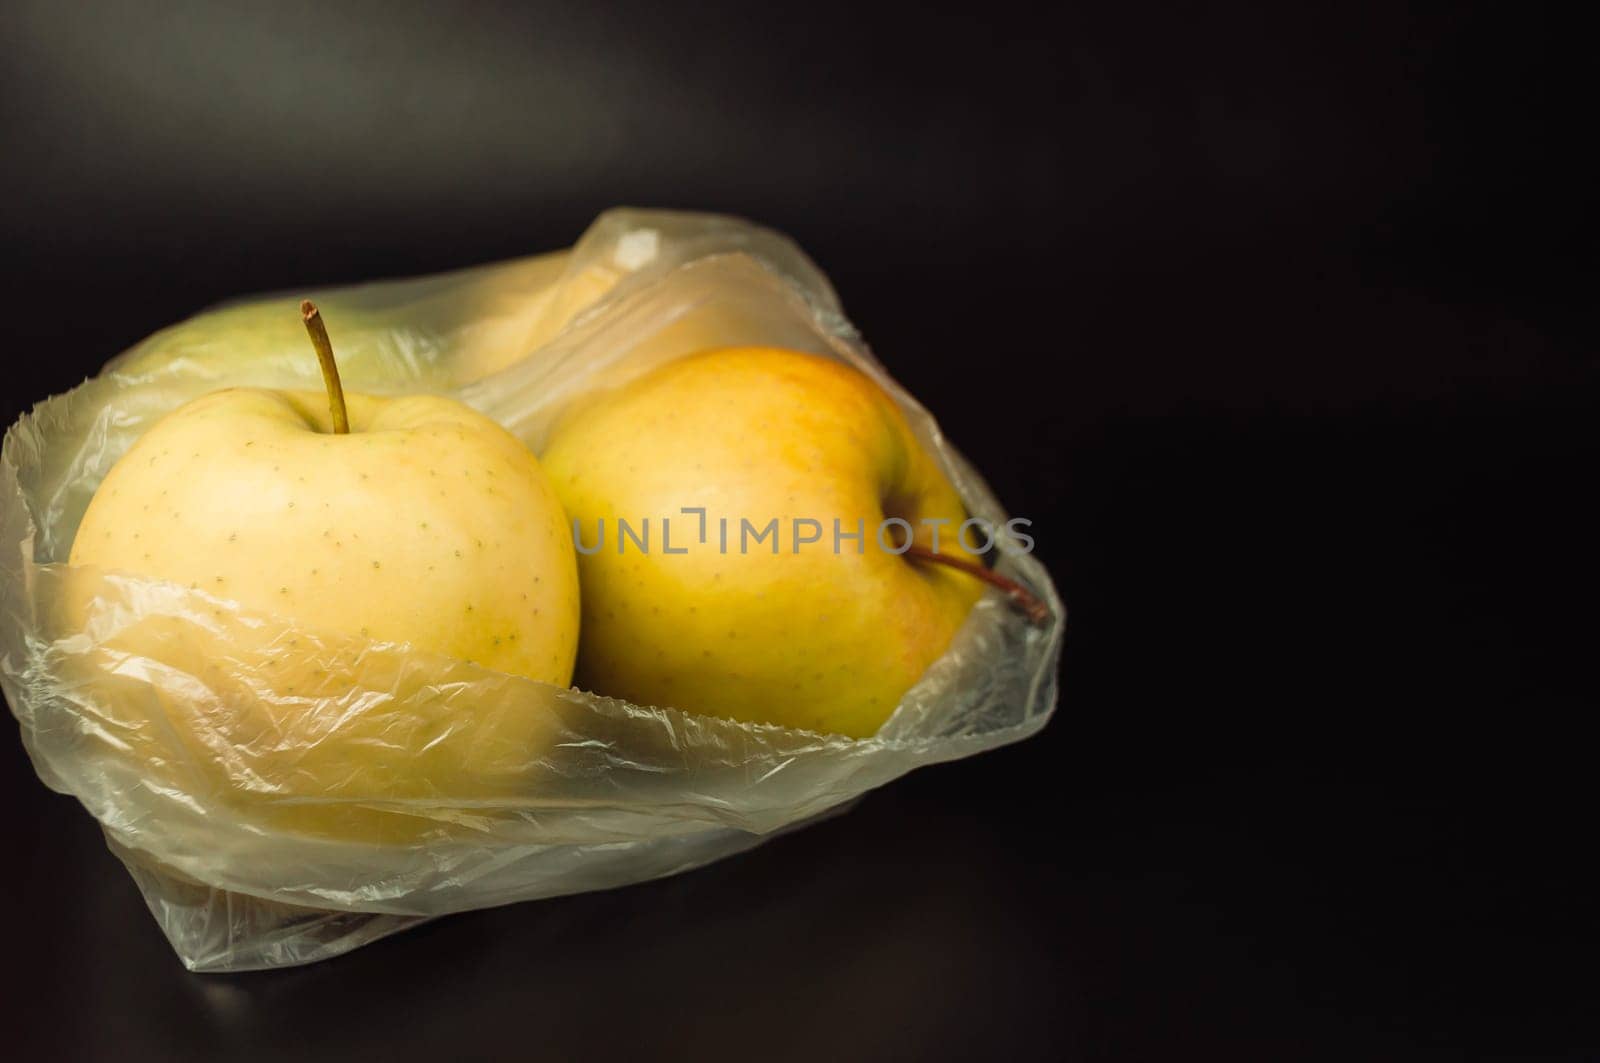 A plastic bag with two apples in it by Alla_Morozova93